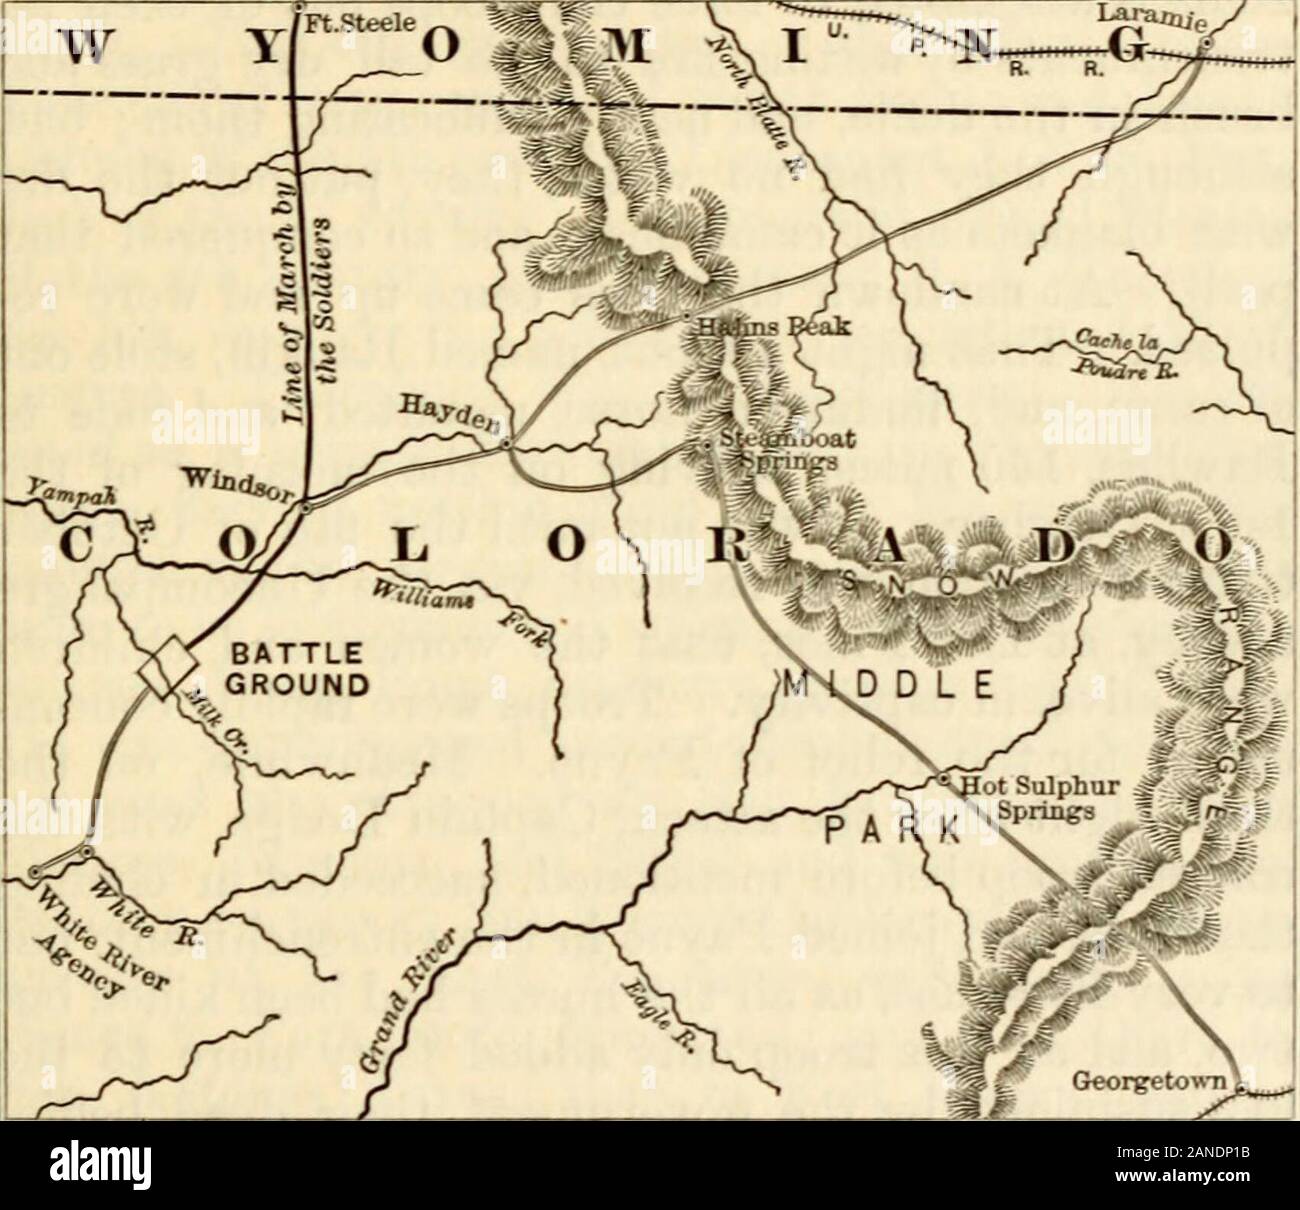 History of Nevada, Colorado, and Wyoming, 1540-1888 . the Utes at Milk creek on theevening of the 29th. On the morning of the 29th, a large number set offwith the alleged object of having a hunt, taking theirrifles and ammunition. The ordinary affairs were be-ing transacted with less than customary friction, ow-ing to the absence of so many turbulent spirits, whenat about one oclock the lio-htenino; fell out of a clearsky. A runner from Milk creek brought the newsthat a battle was going on between the troops andIndians at that place. This information was not im-parted to Meeker, but half an ho Stock Photo